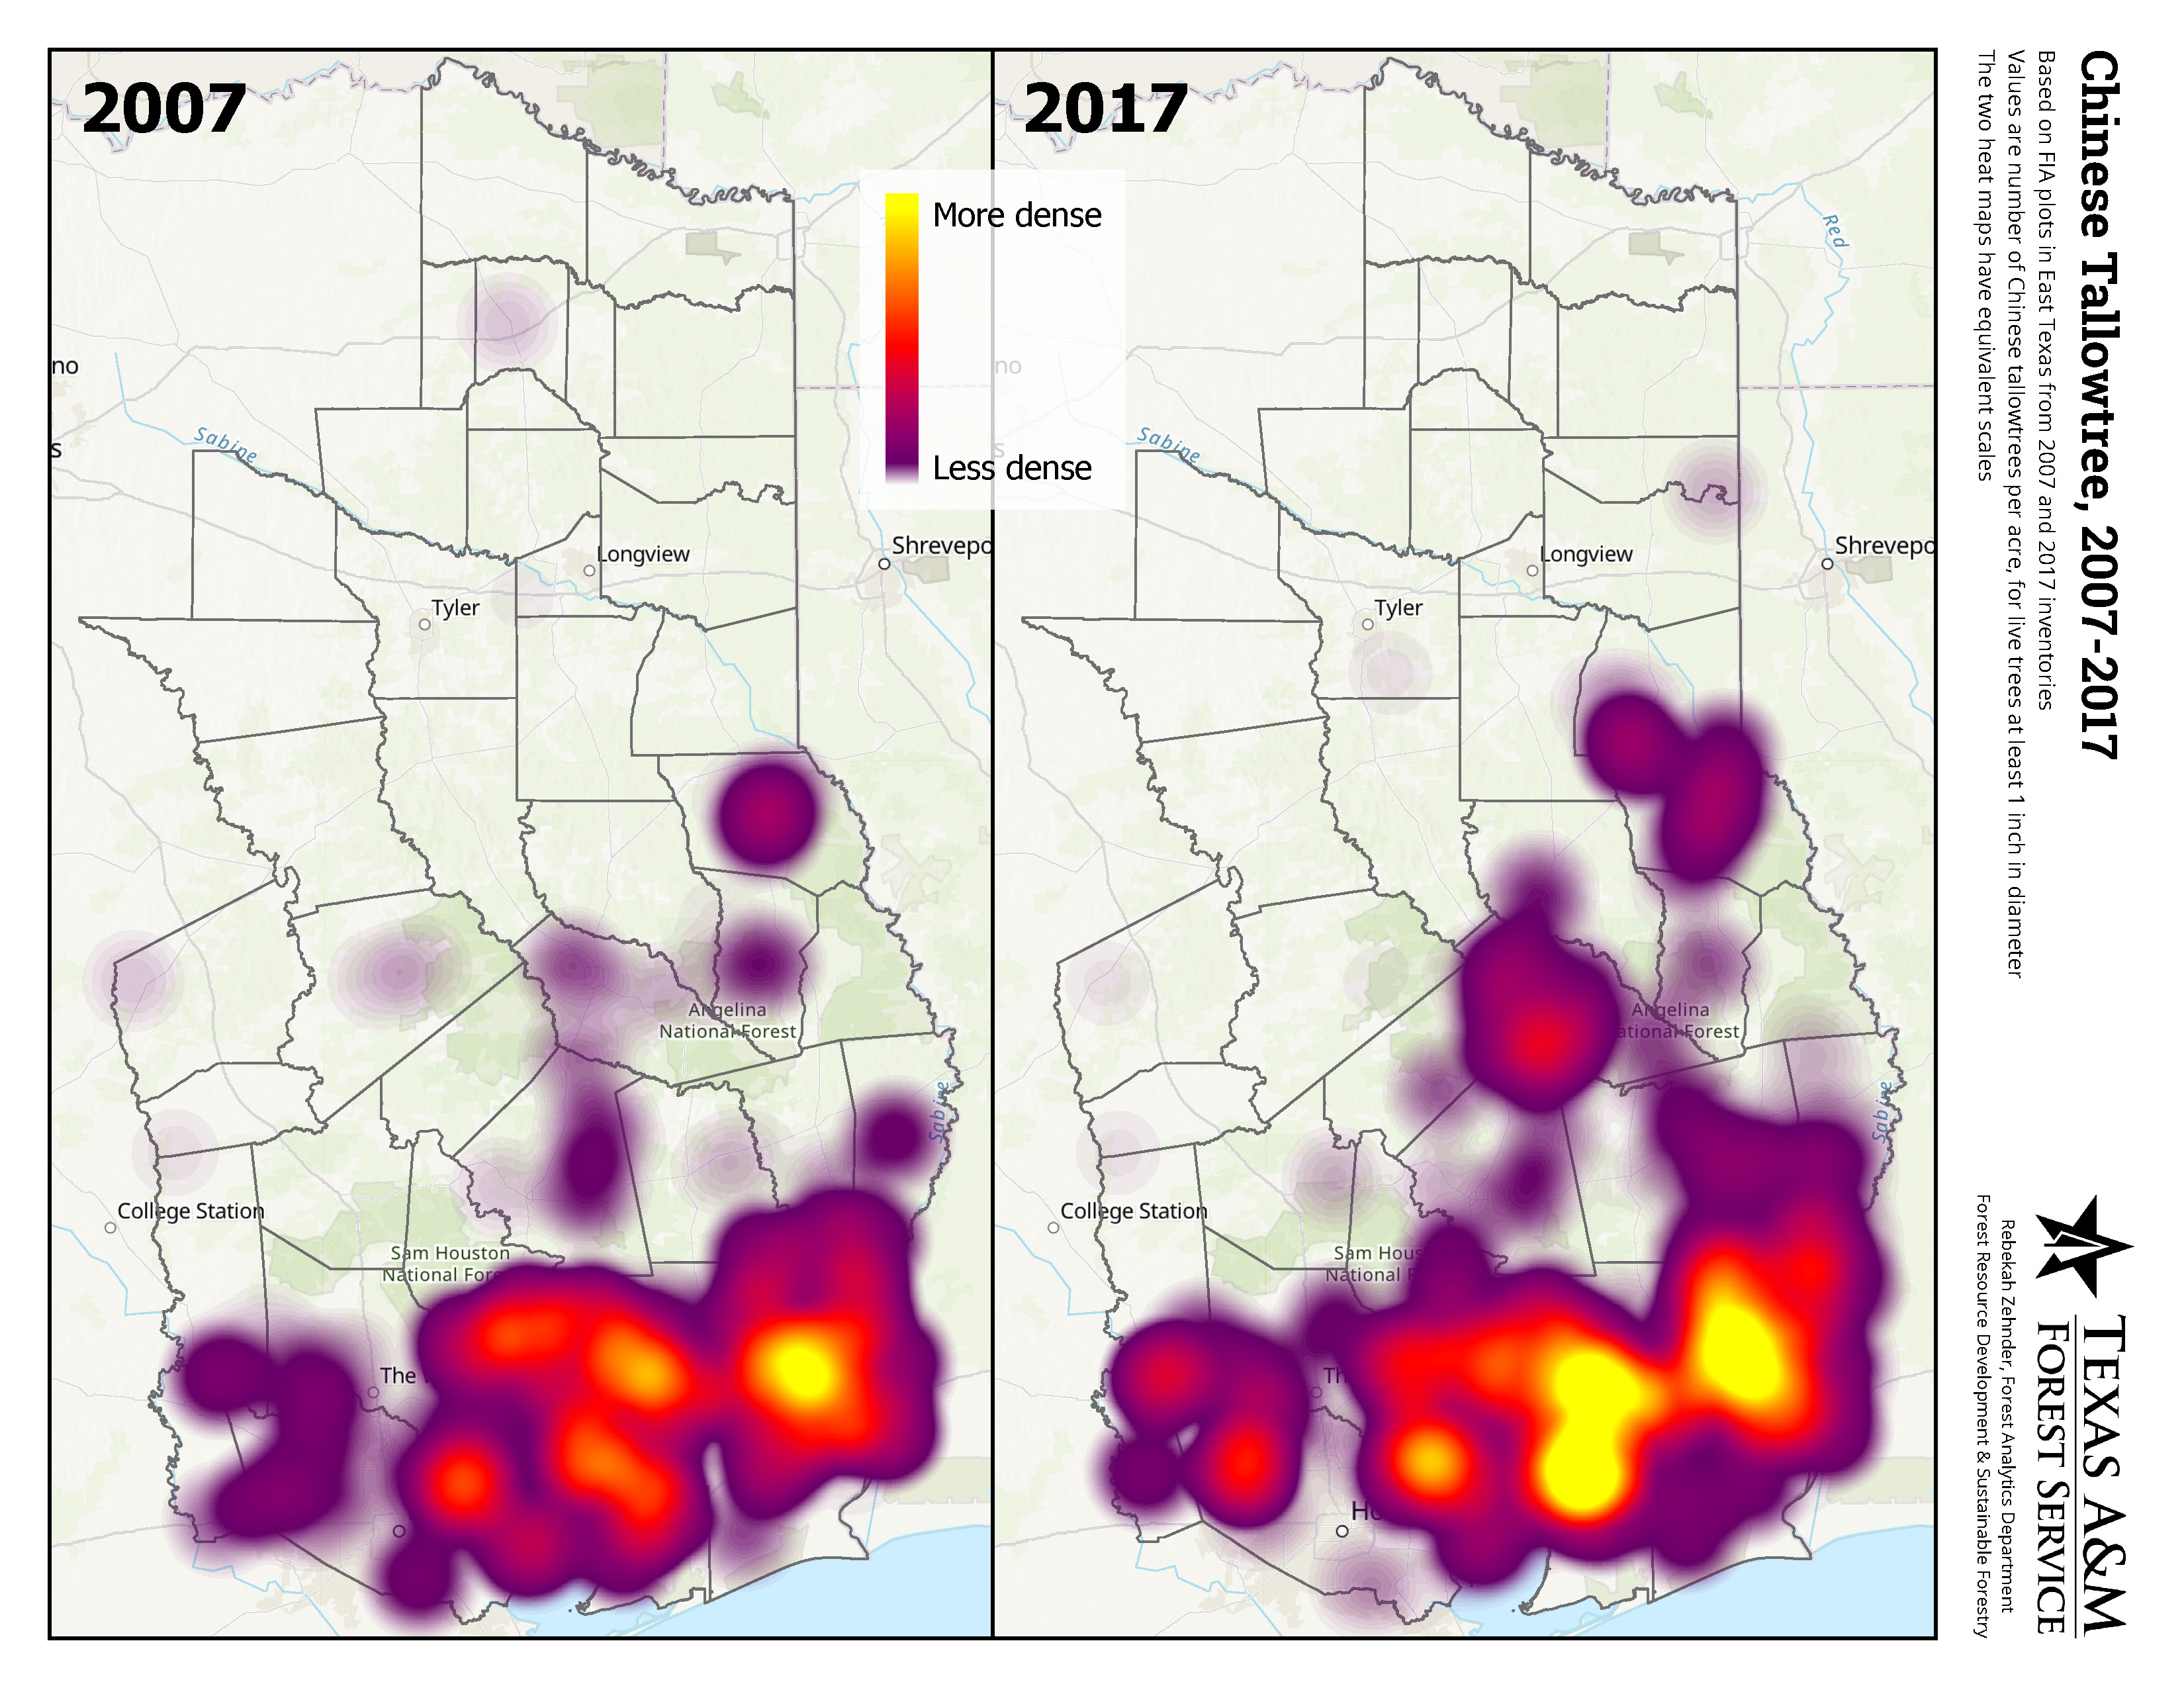 Chinese Tallow Heatmap 2007 and 2017